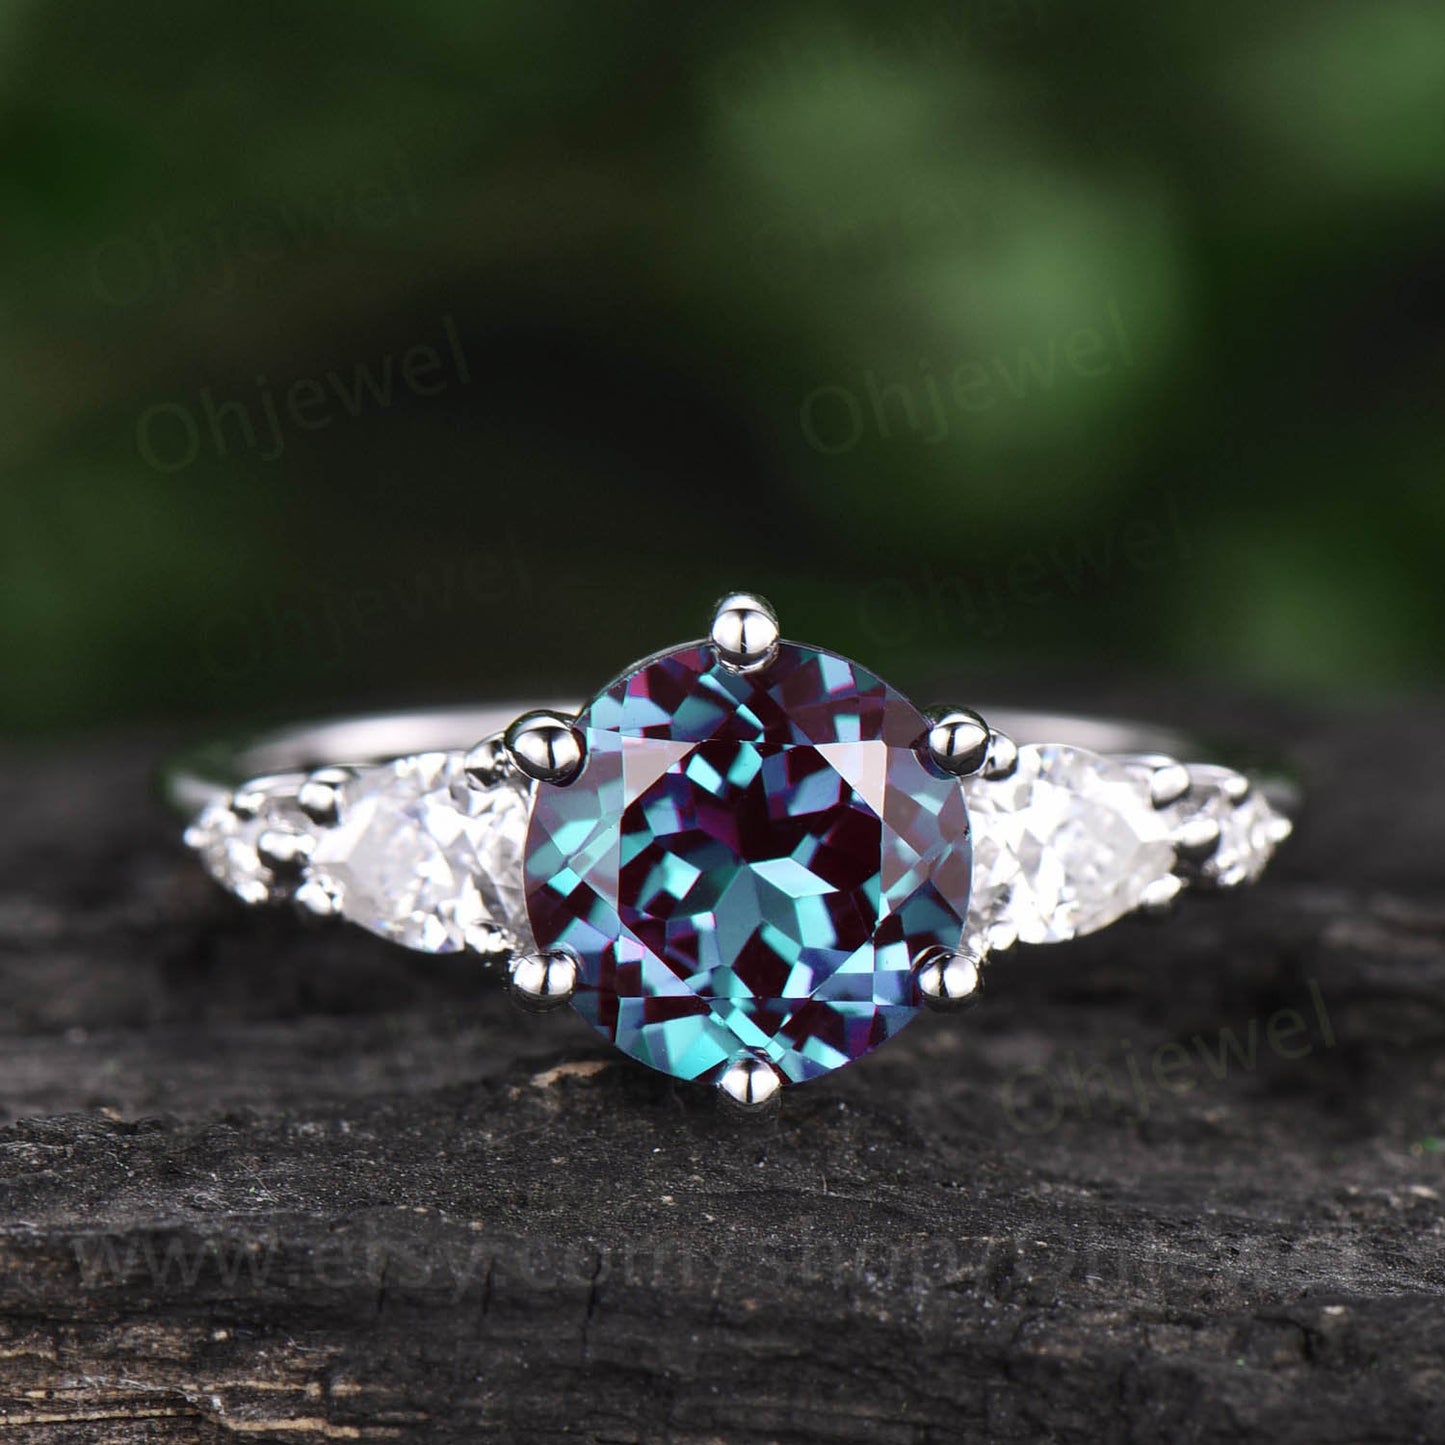 Round Alexandrite five stone ring vintage Alexandrite engagement ring rose gold women pear shaped moissanite ring color change stone ring